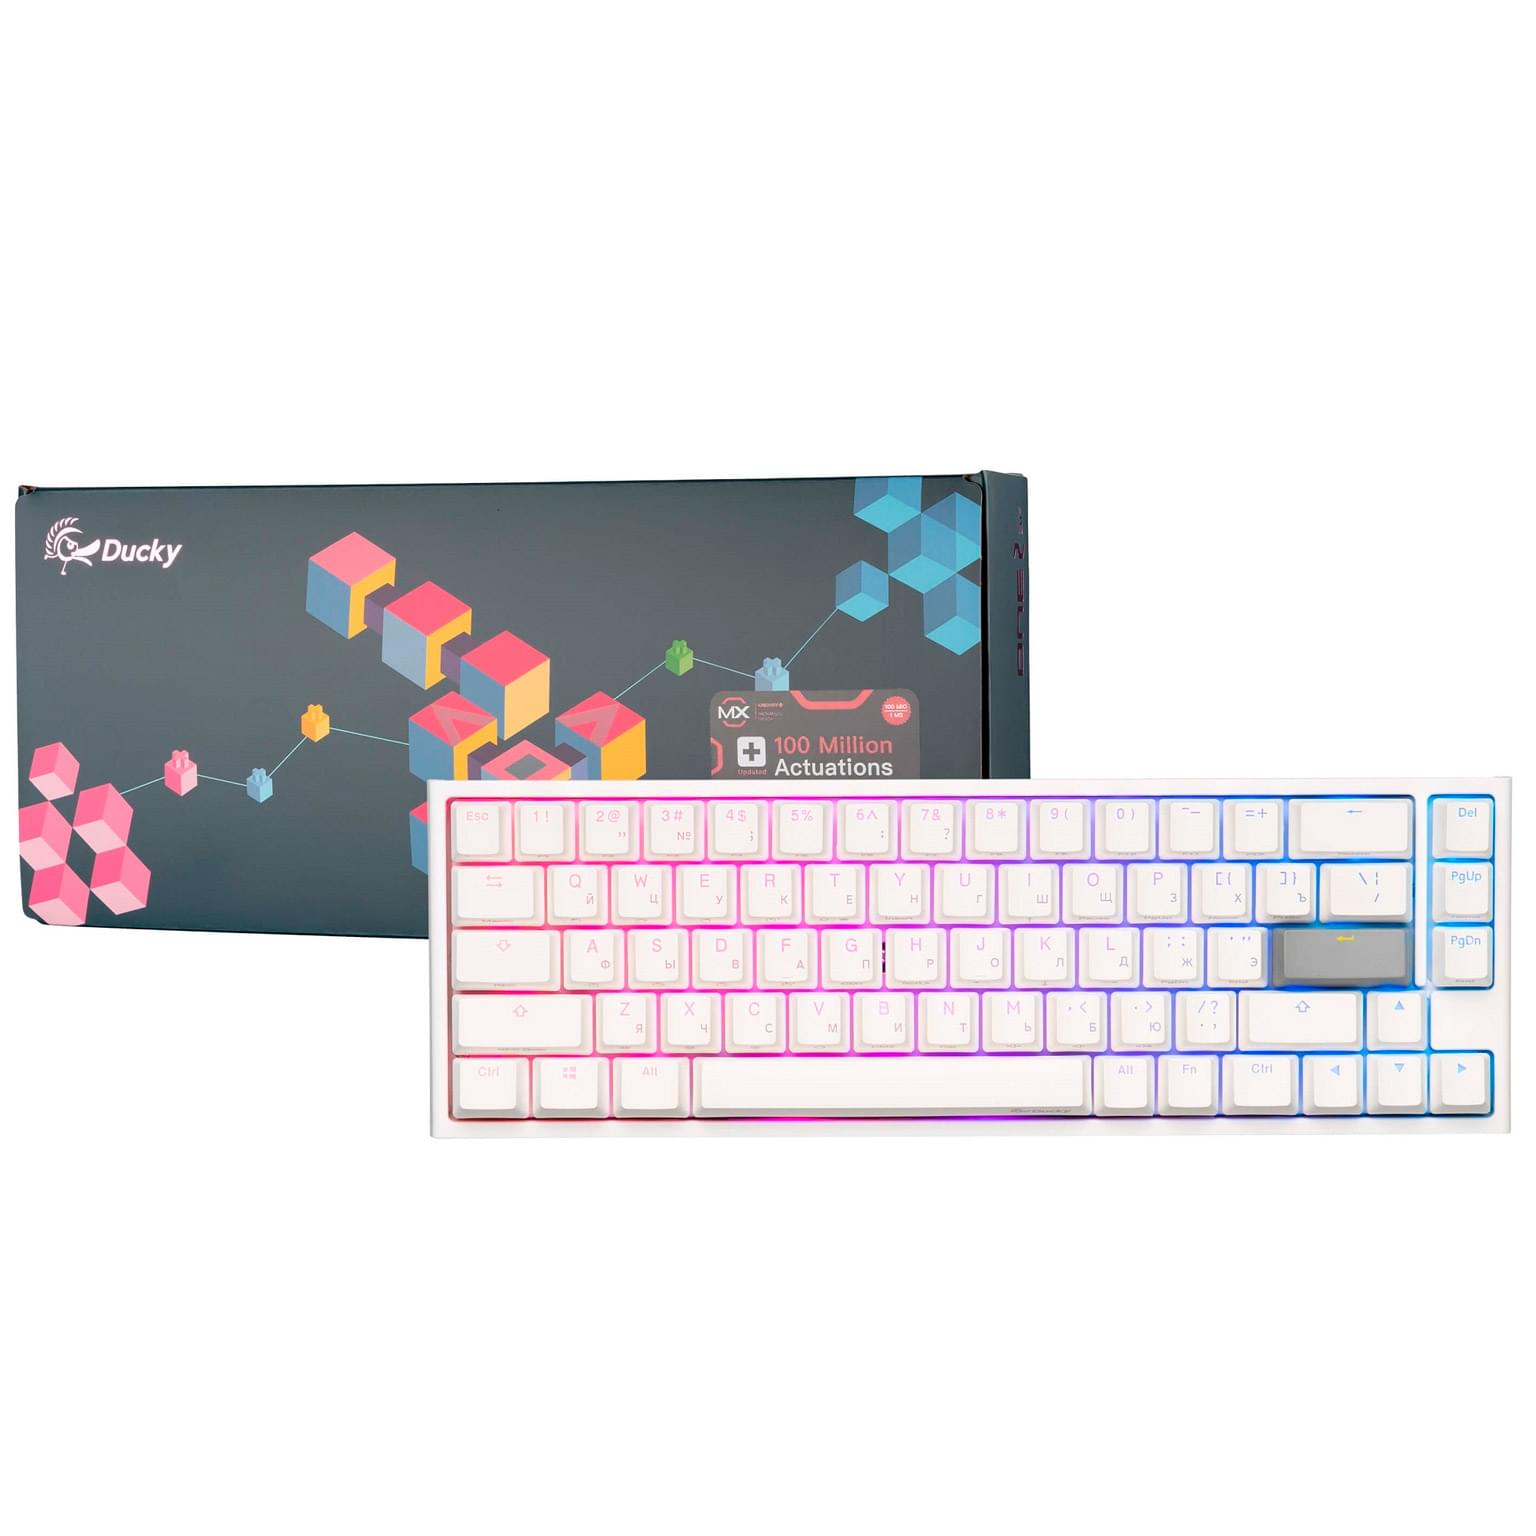 PowerColor × Ducky コラボモデル ゲーミング キーボード PowerColor X Ducky One SF Spec